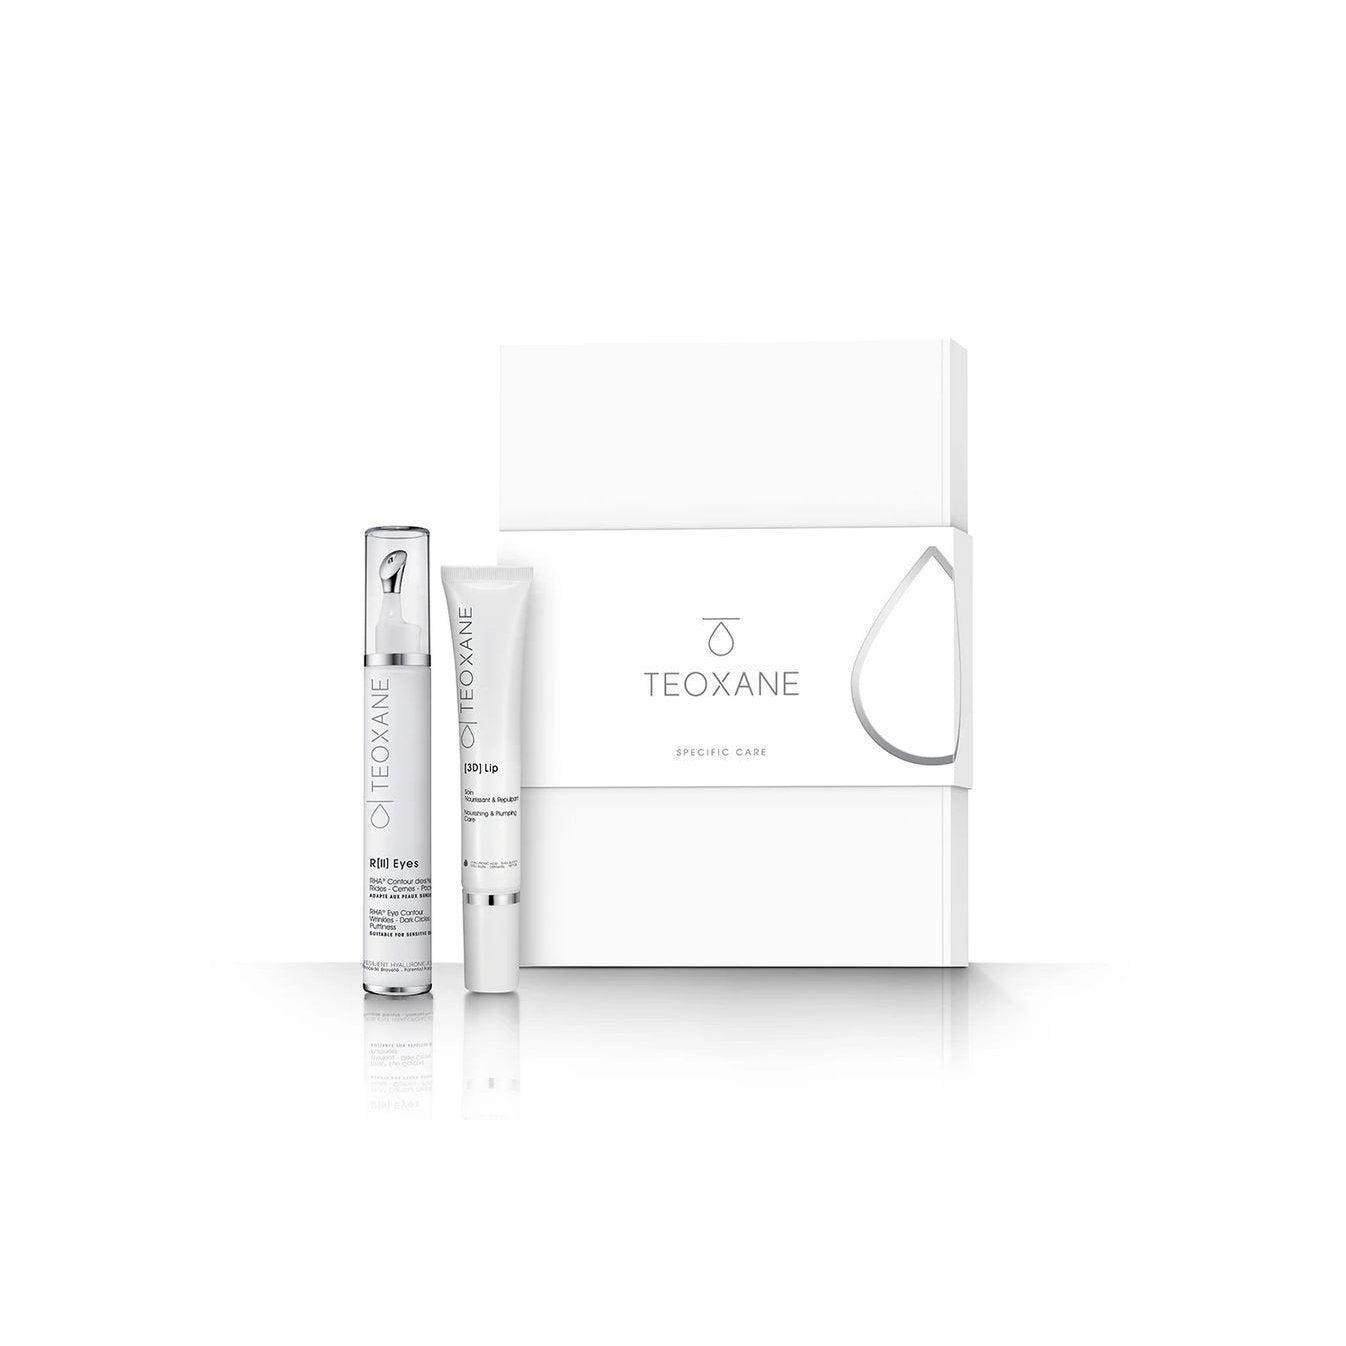 Teoxane Specific Care Gift Collection-The Facial Rejuvenation Clinic